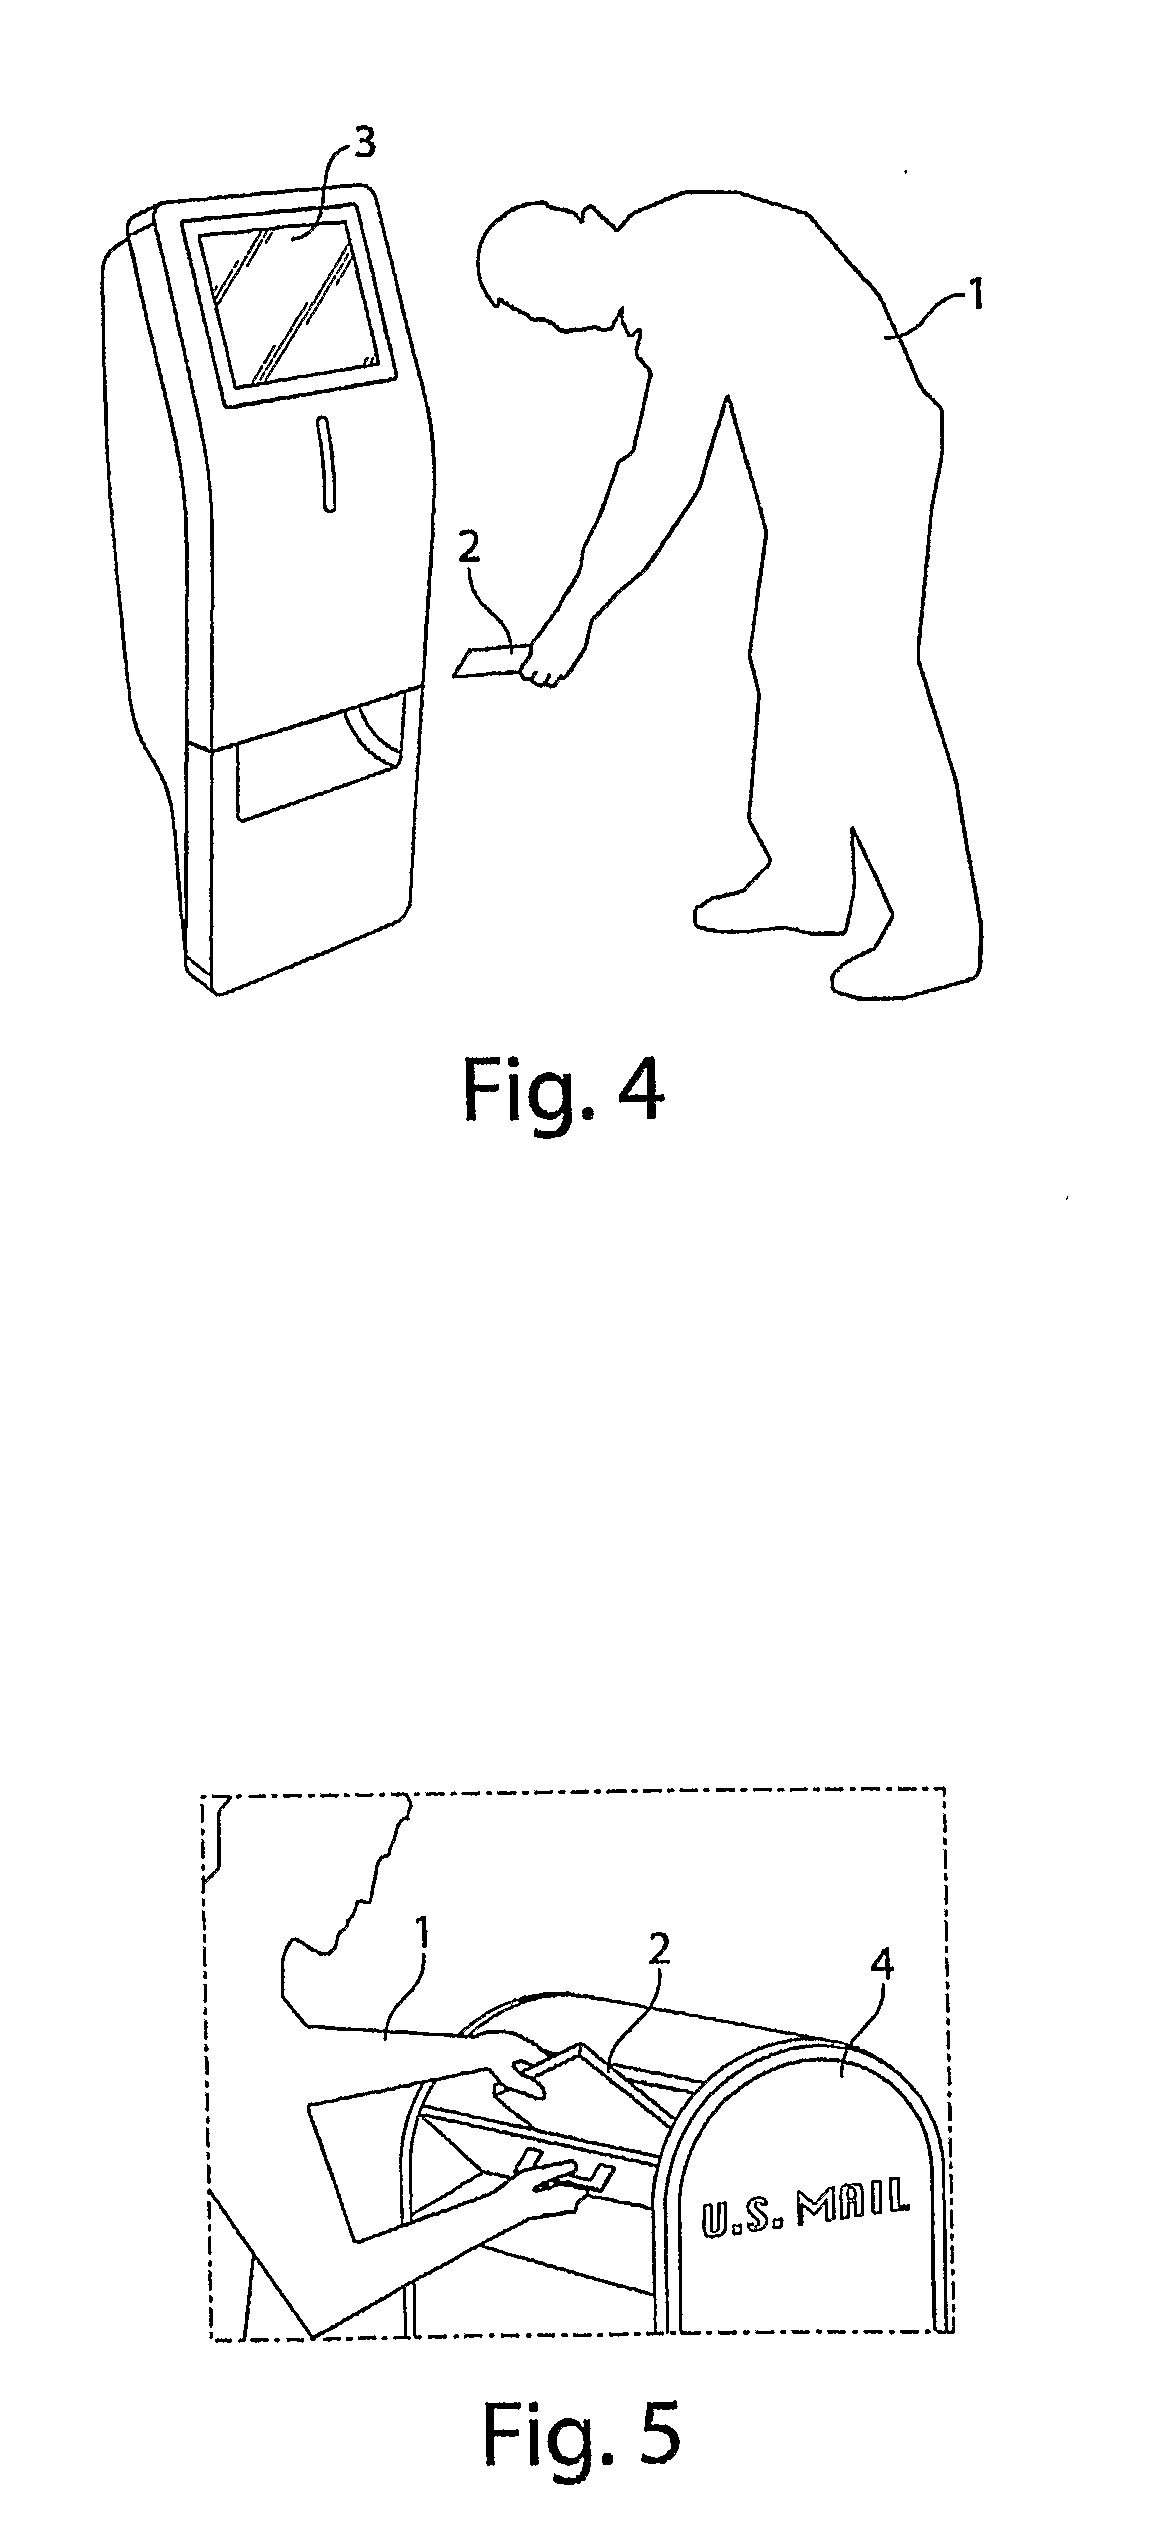 Systems, methods and devices for dispensing products from a kiosk